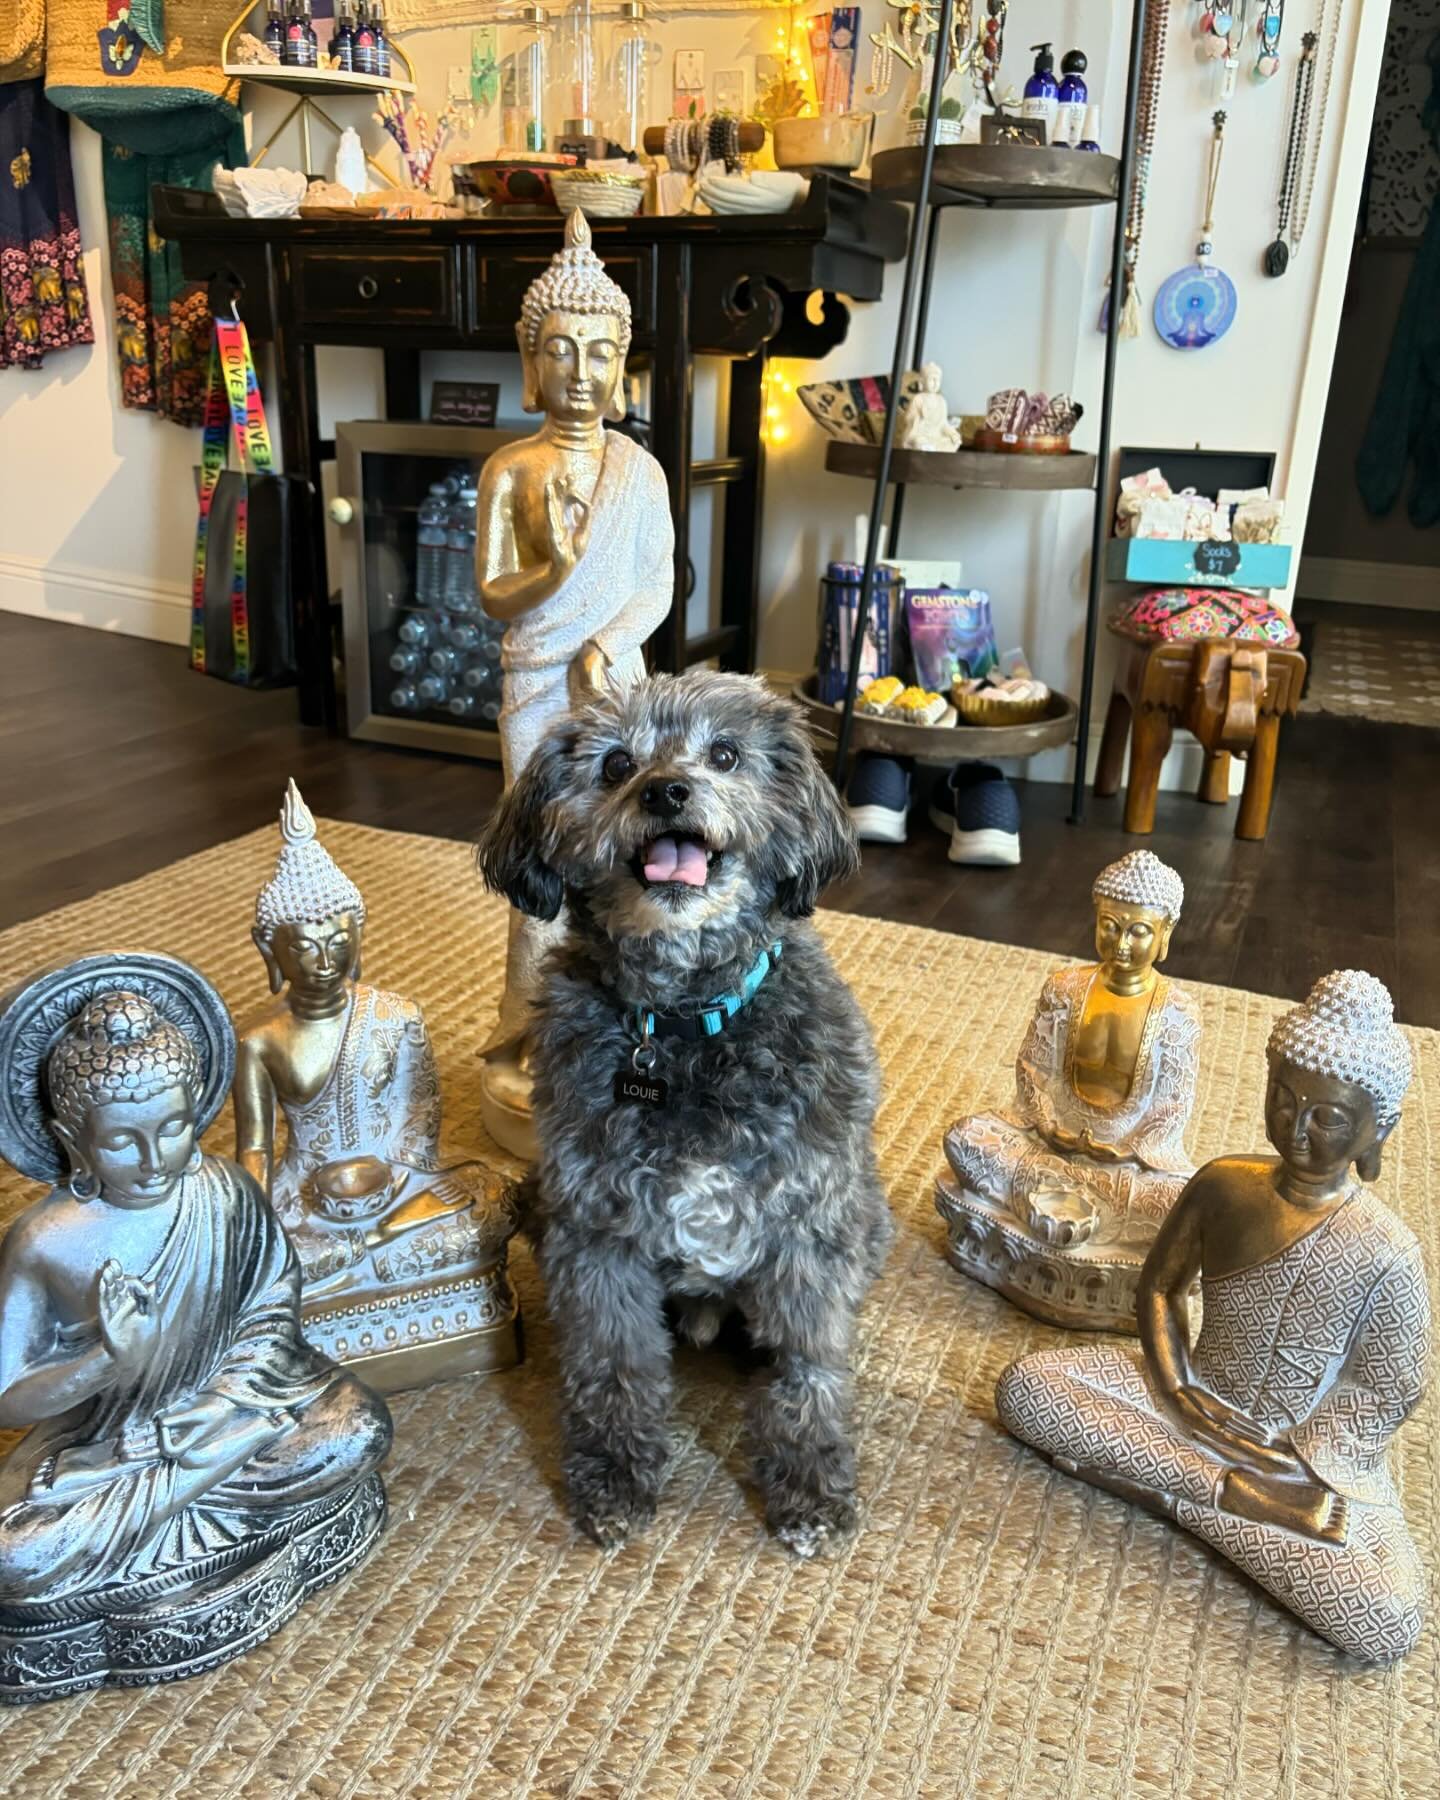 Our 🪷She Shed Boutique🪷 is full of gorgeous handbags, kimonos, comfy yoga pants (one size fits all), jewelry, dreamcatchers, elixirs, crystals, and so much more! 

We have many new items including these beautiful Buddha statues, perfect for your me